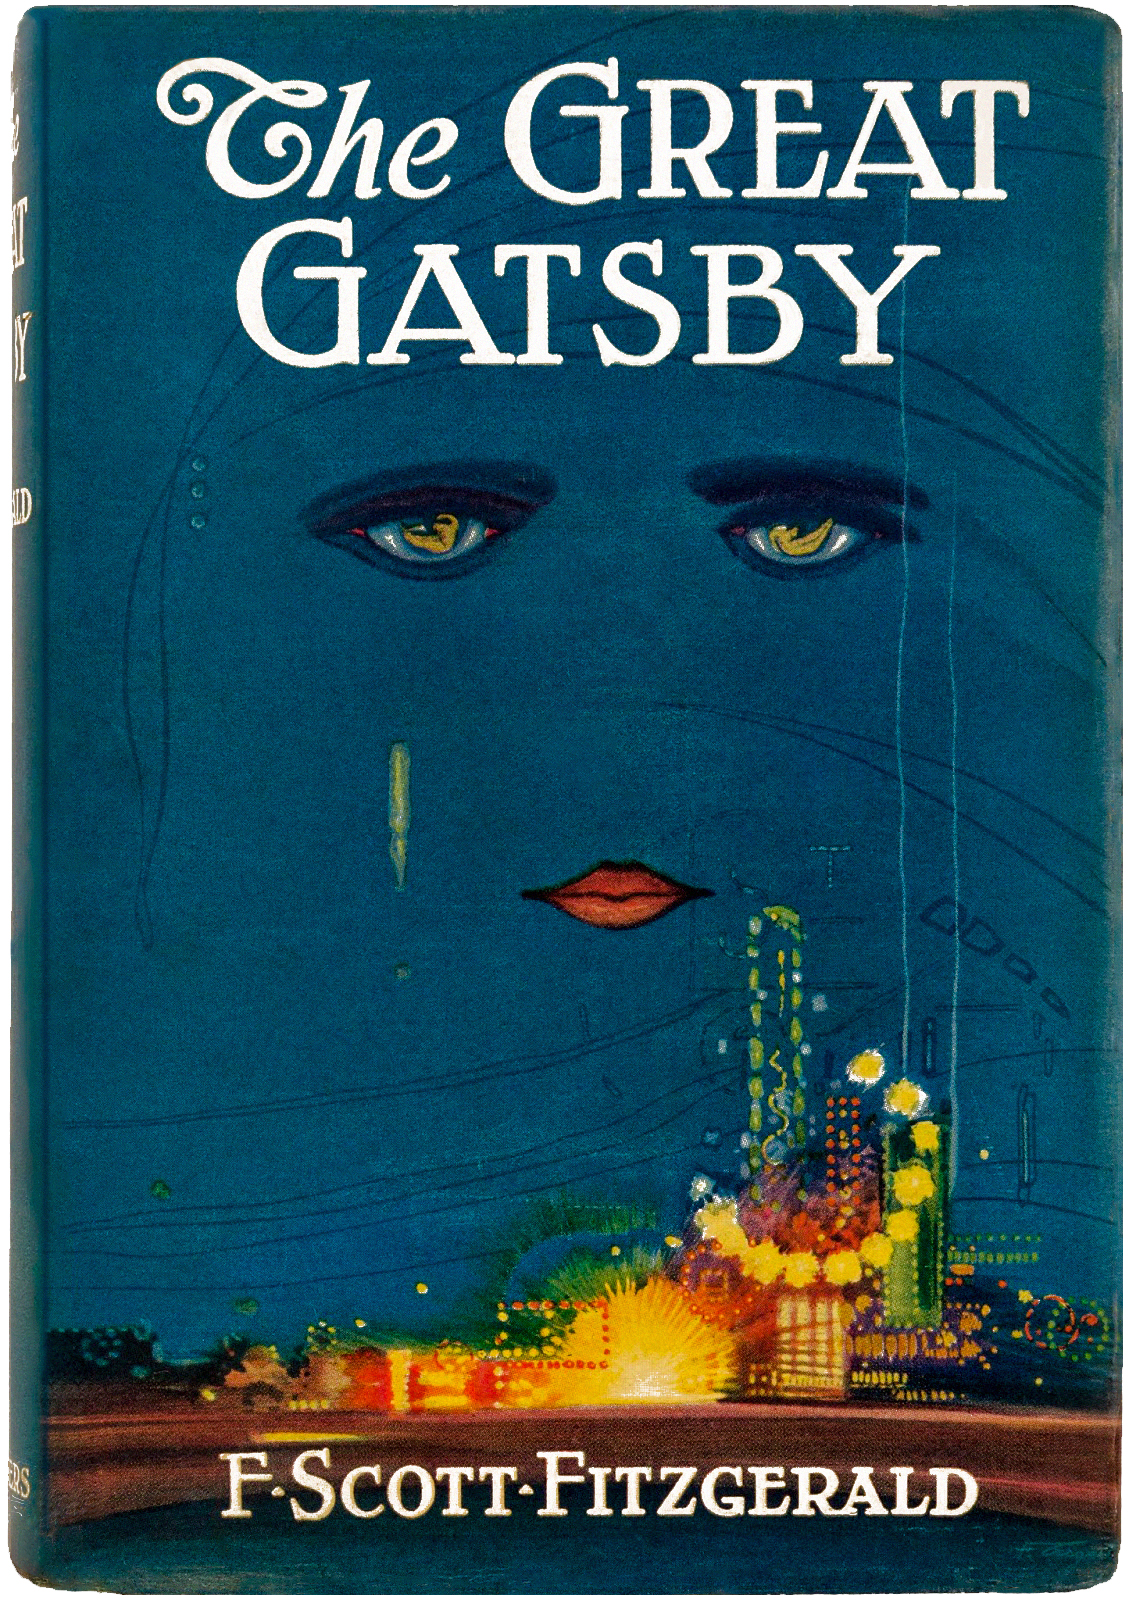 in what way is gatsby great